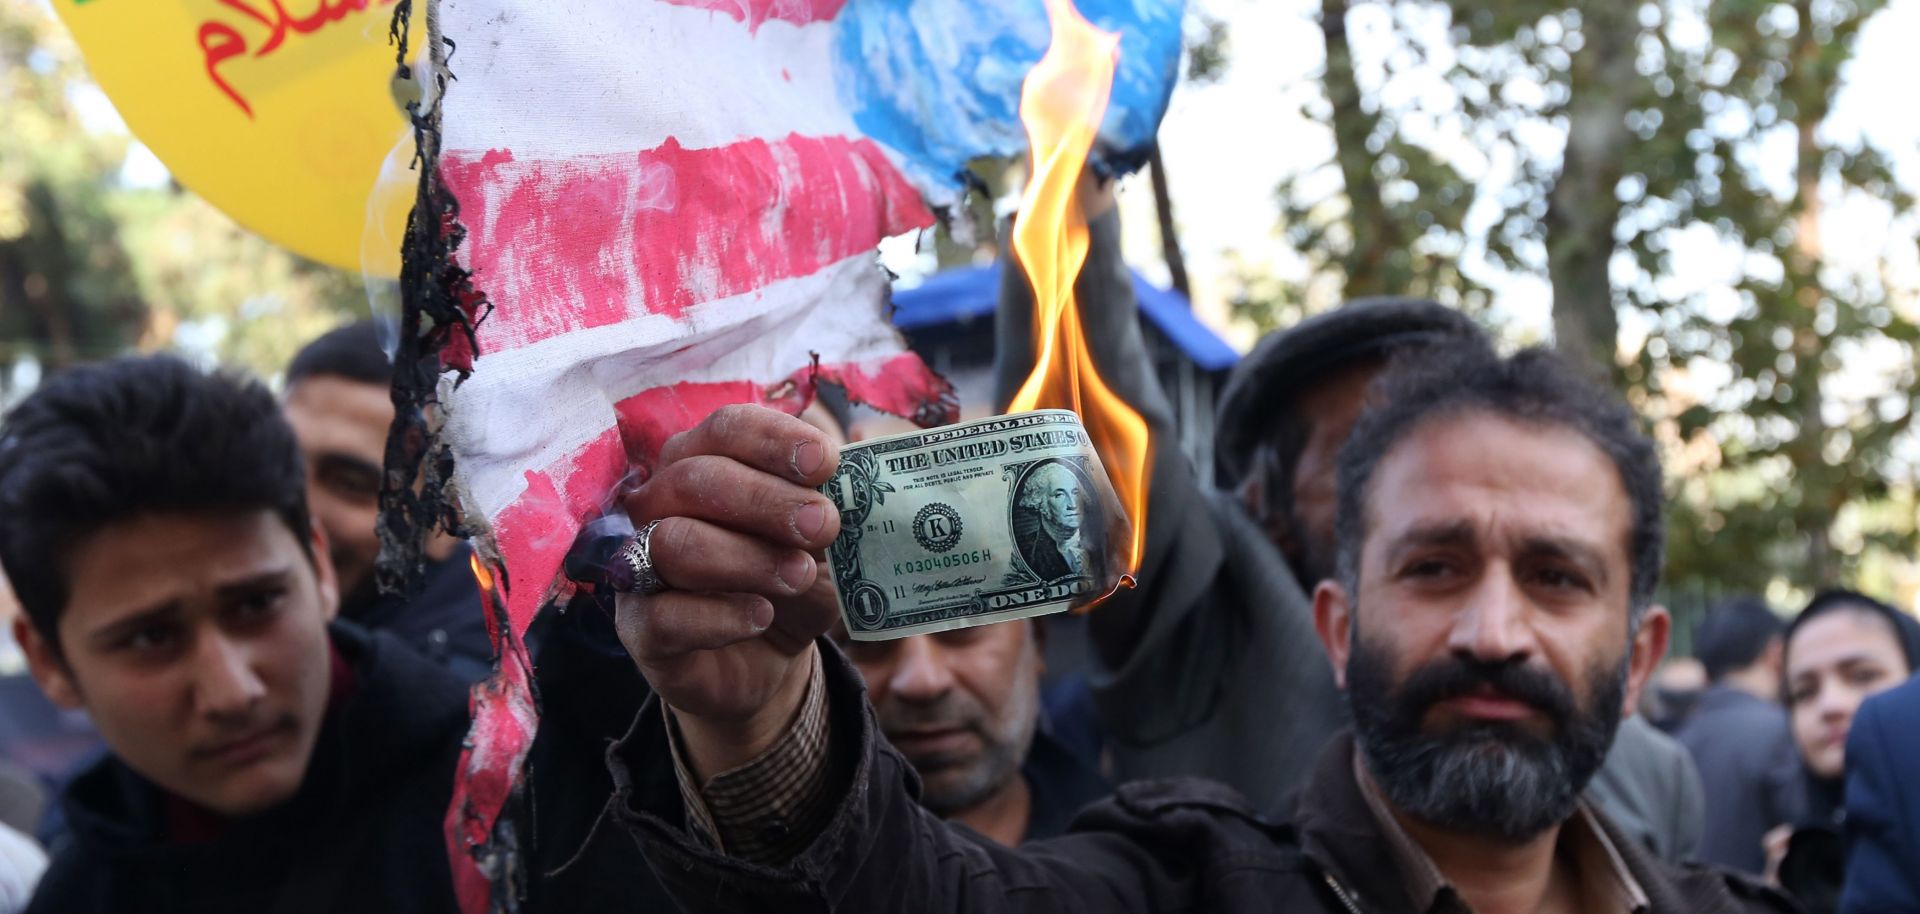 On the eve of renewed sanctions on Iran's oil sector, an Iranian protester burns a U.S. dollar.